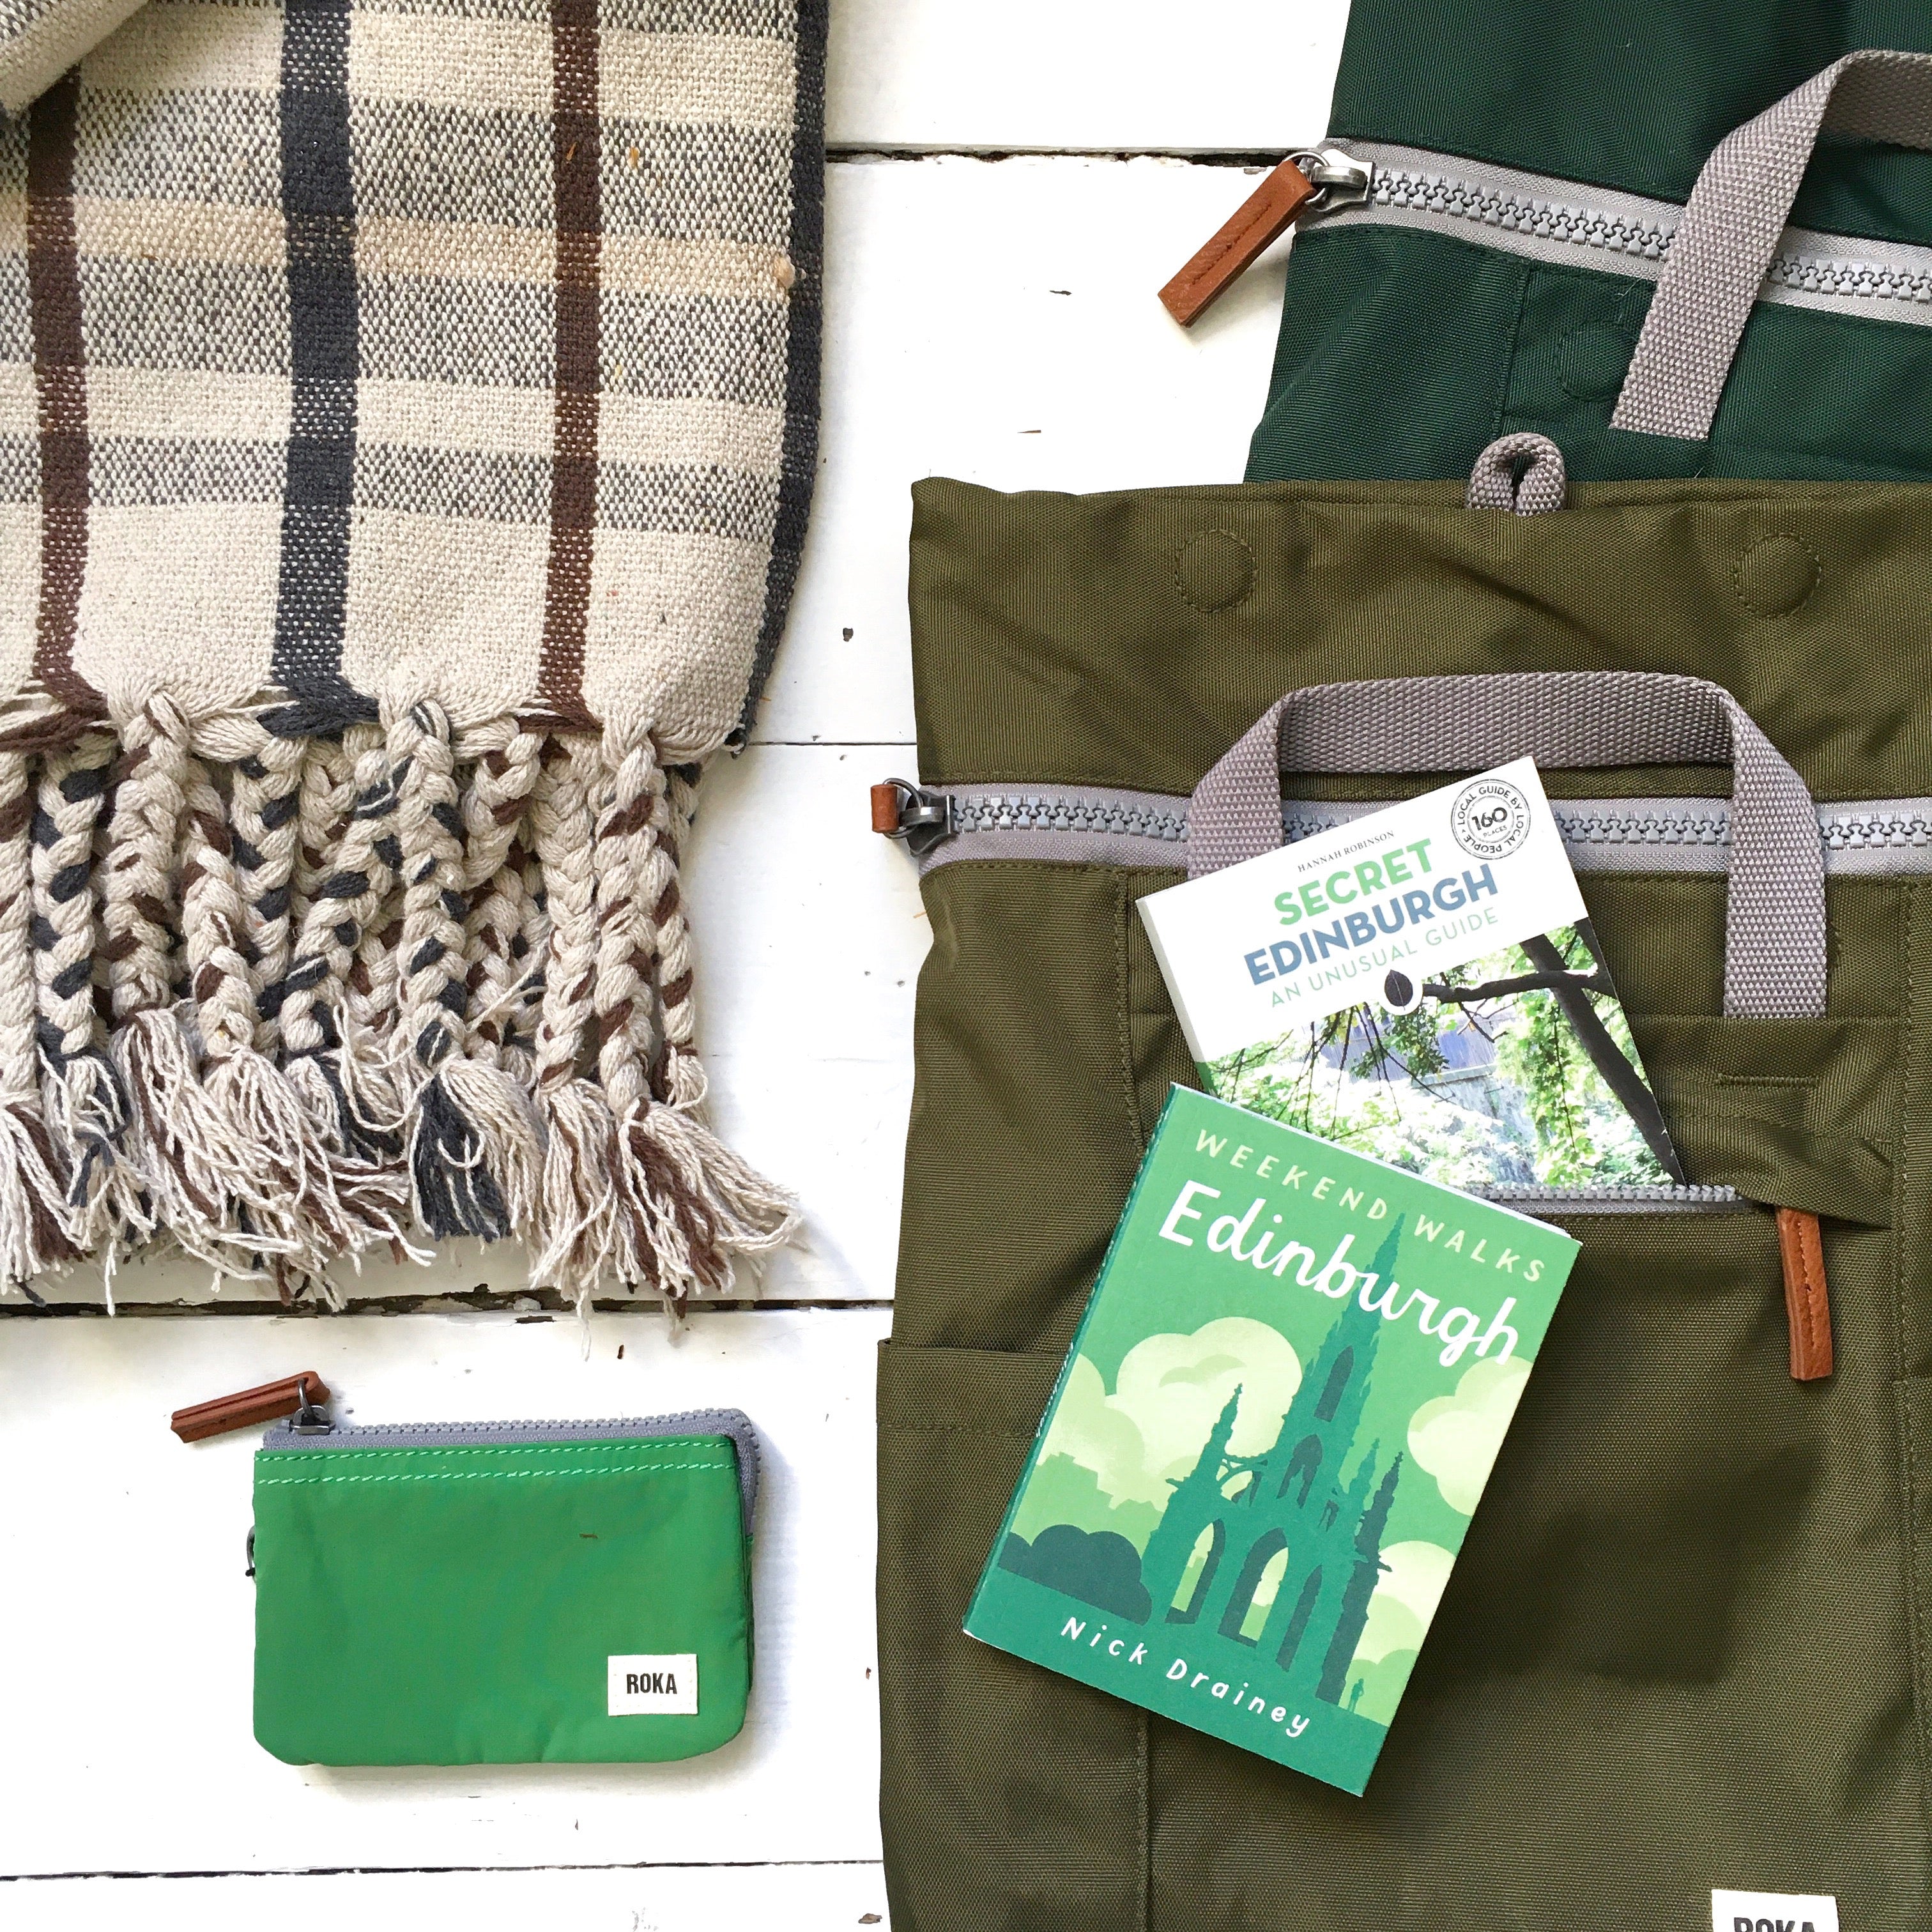 Small Moss Sustainable Finchley Backpack